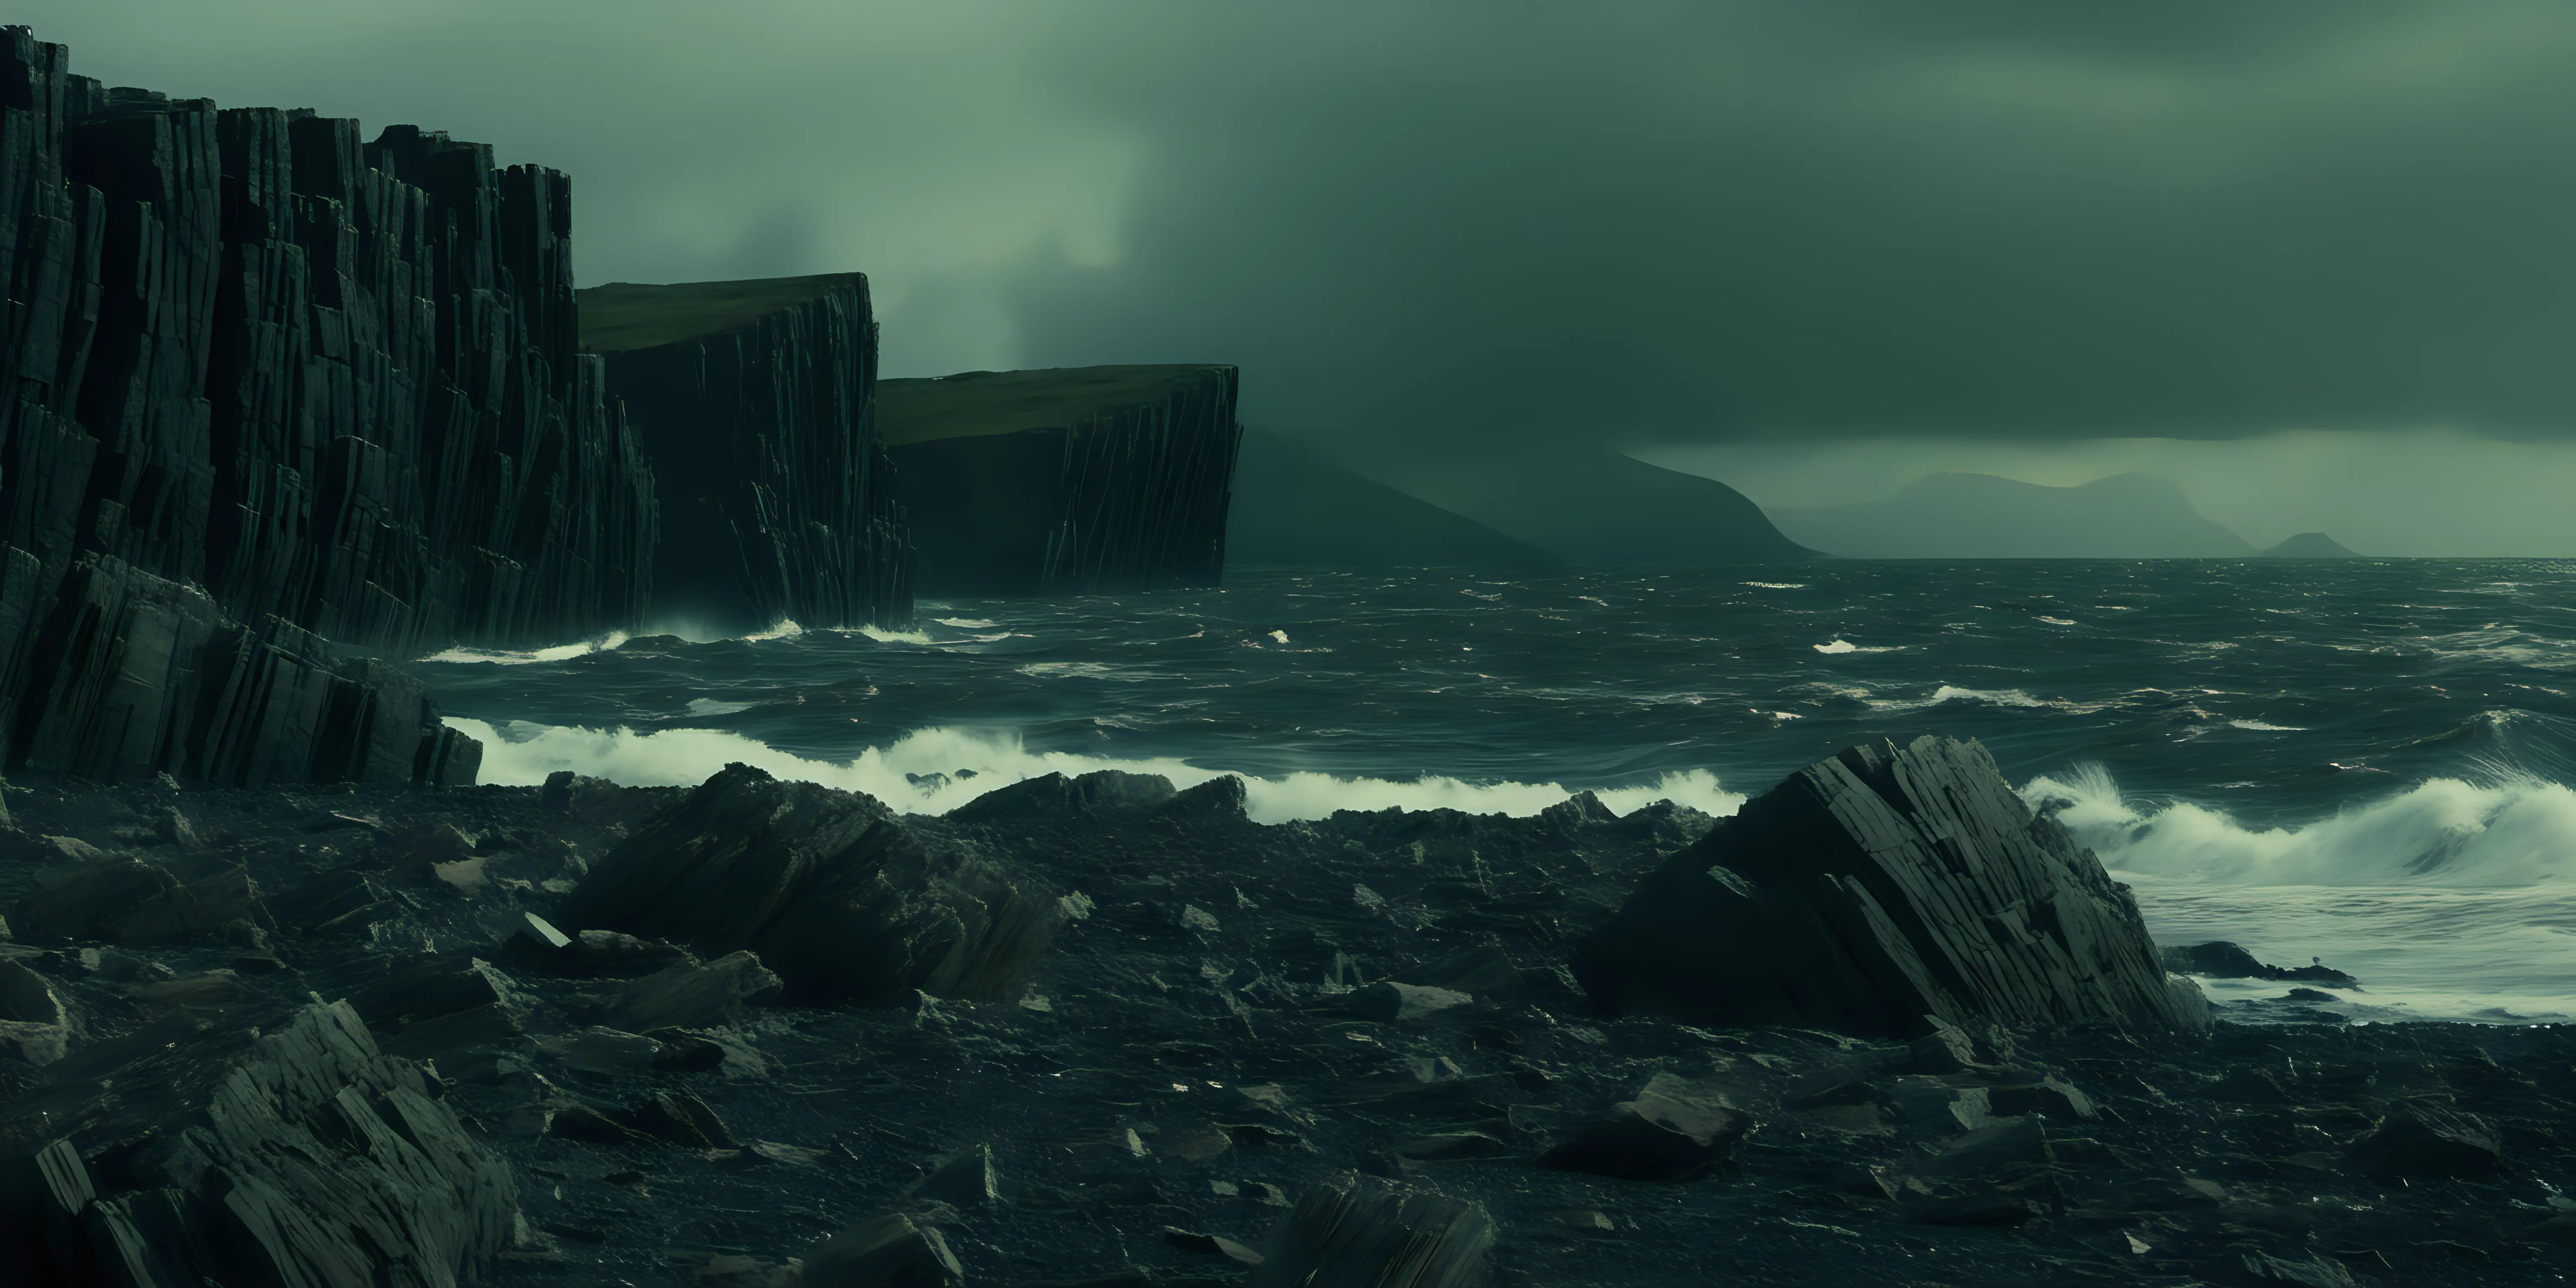 Dystopian Realism Dramatic Scotland Landscape at the End of the World